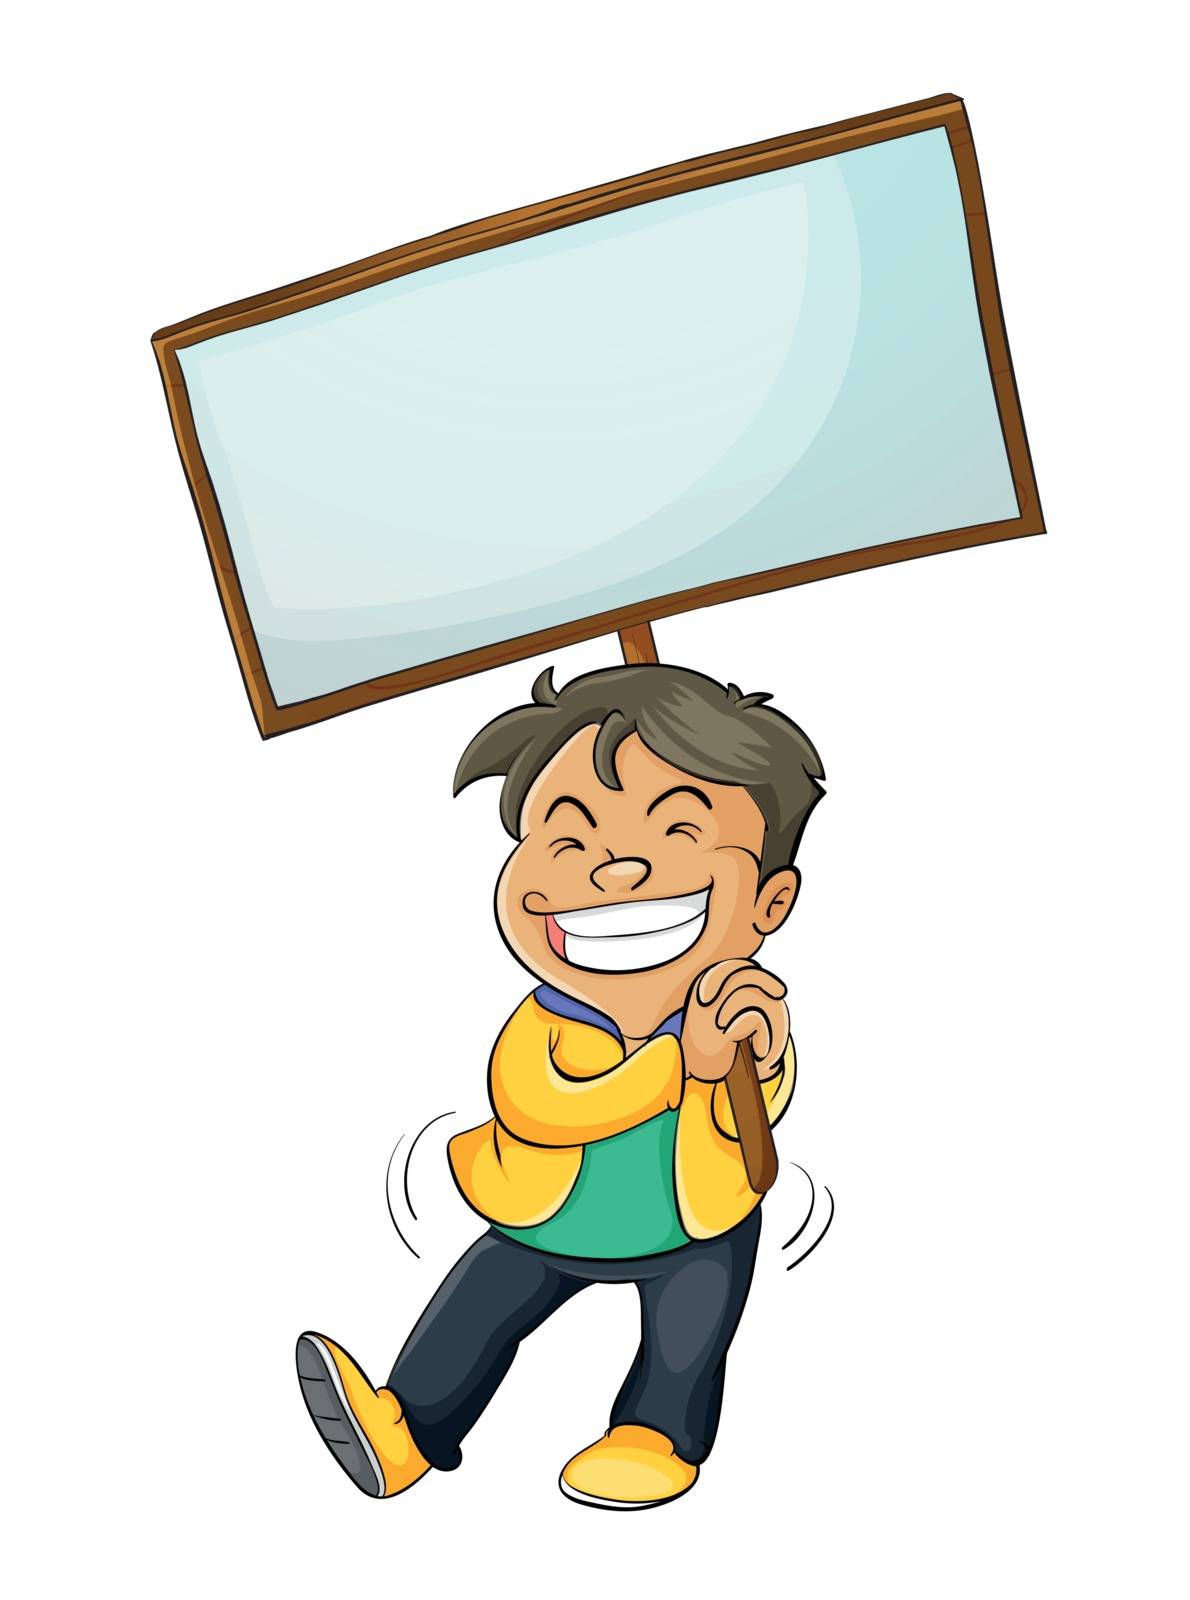 Illustration of a boy with a sign